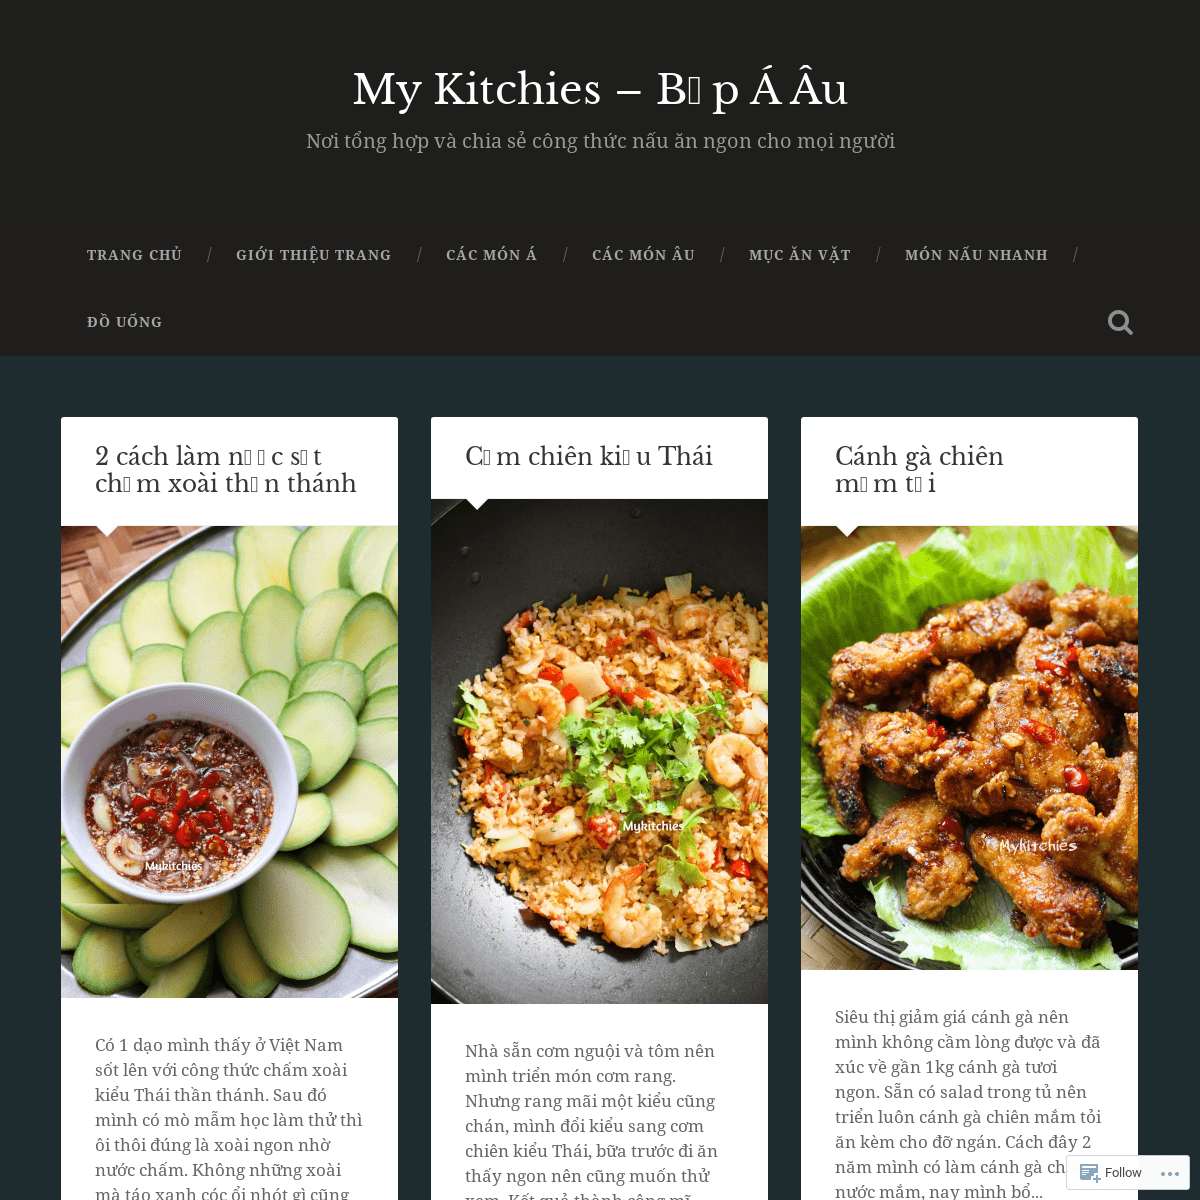 A complete backup of mykitchies.com